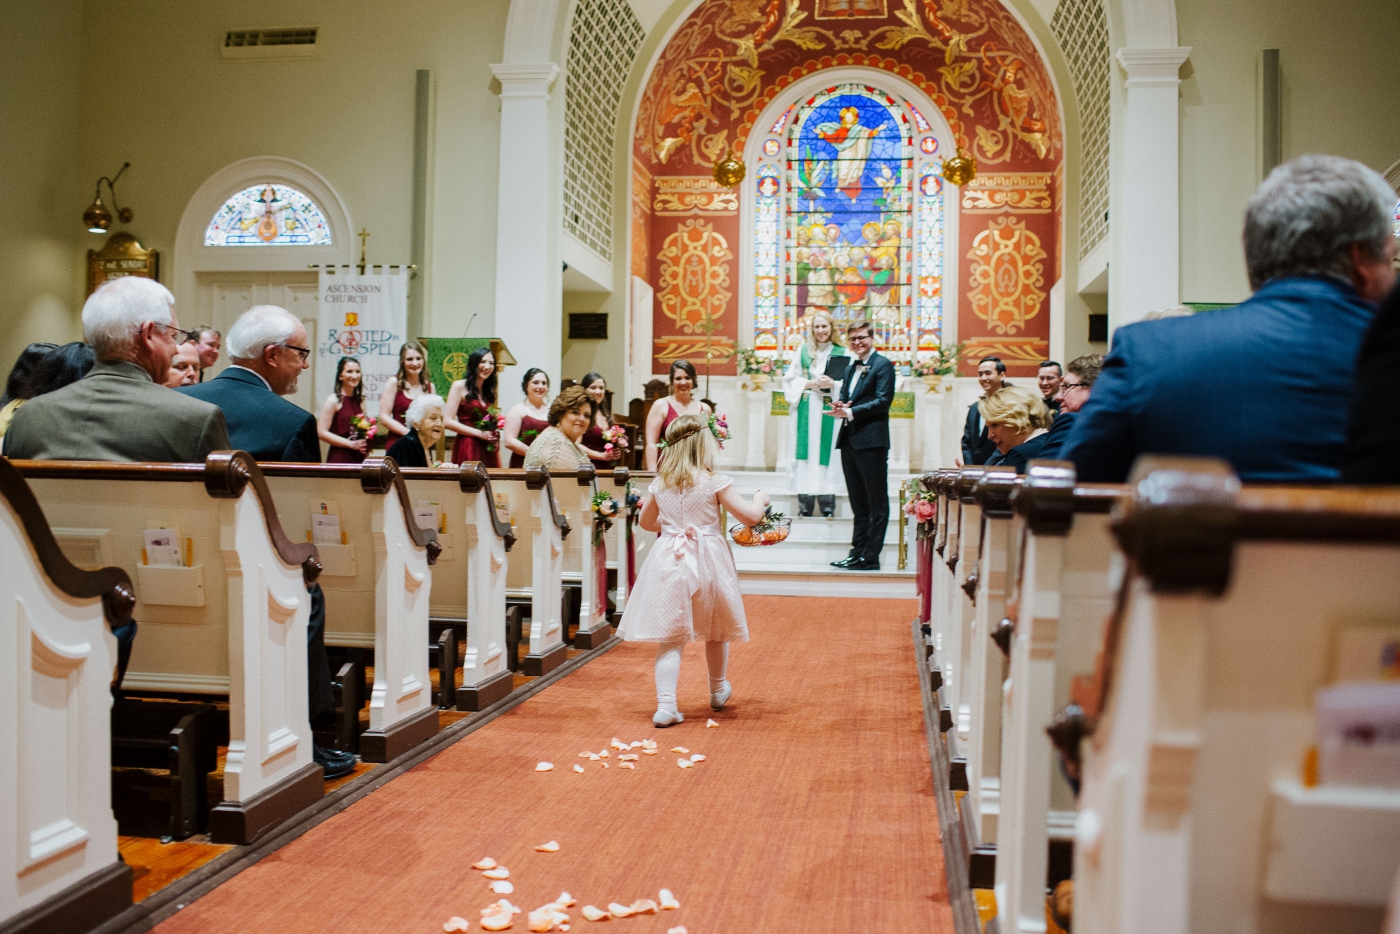 Wedding ceremony at the Lutheran Church of the Ascension in Savannah